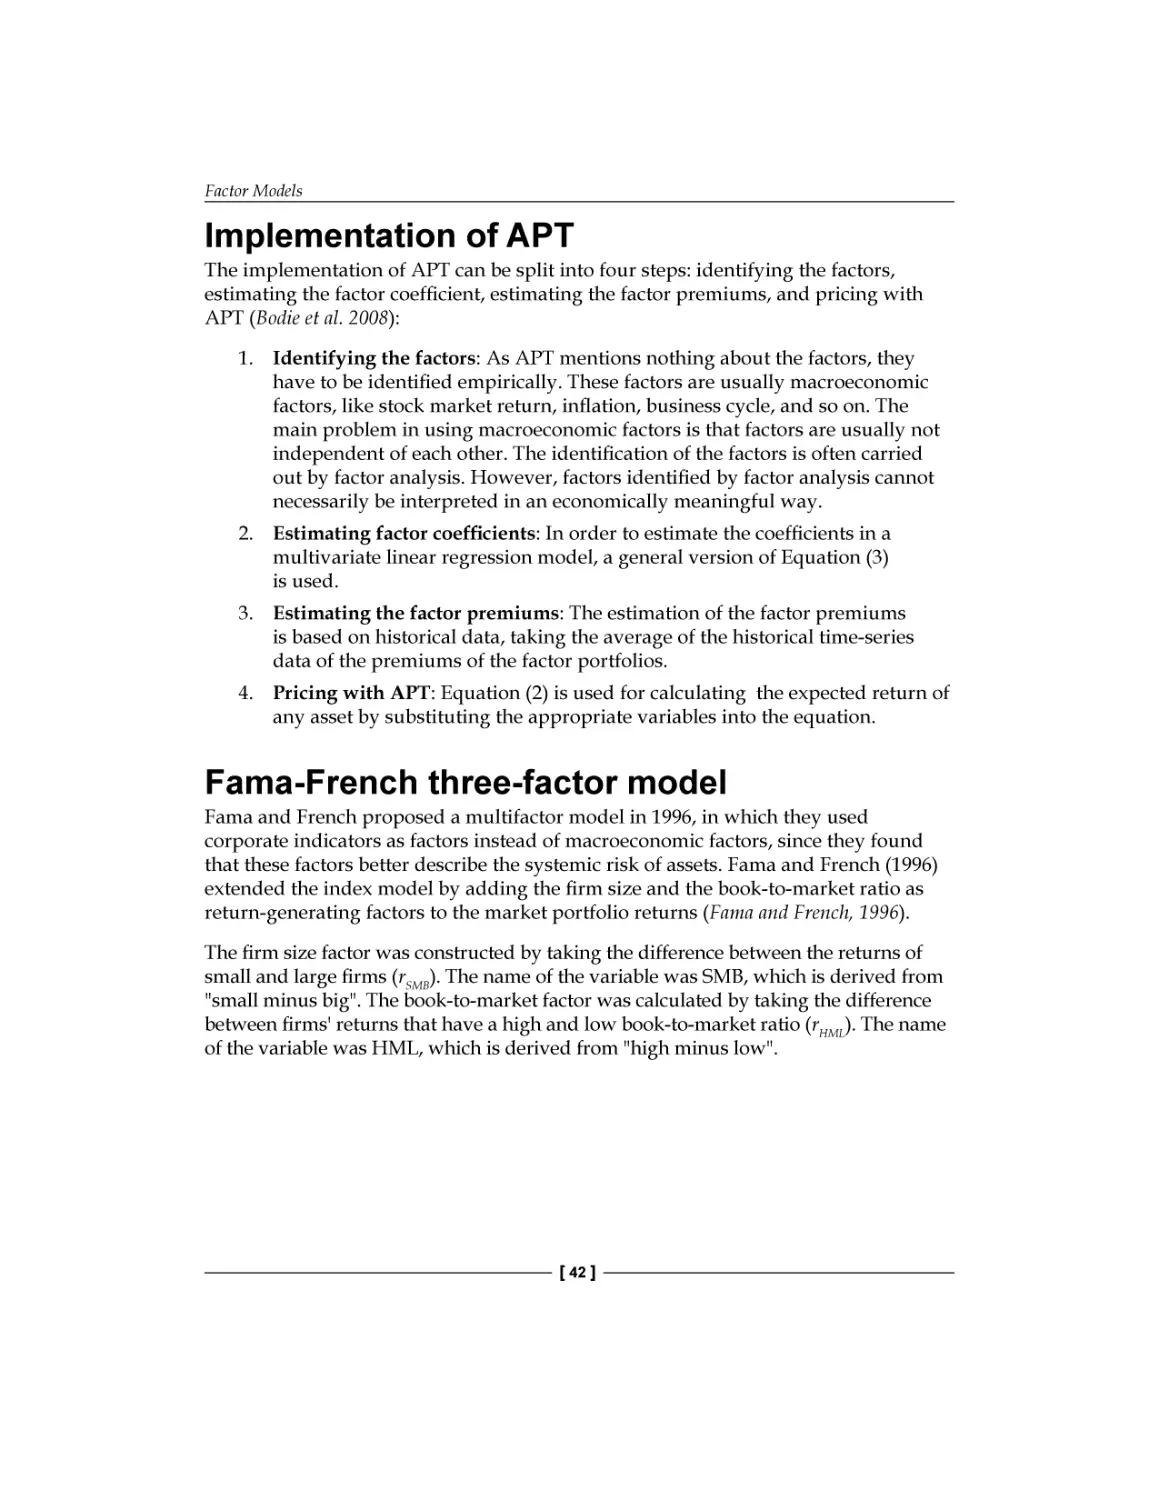 Implementation of APT
Fama-French three-factor model